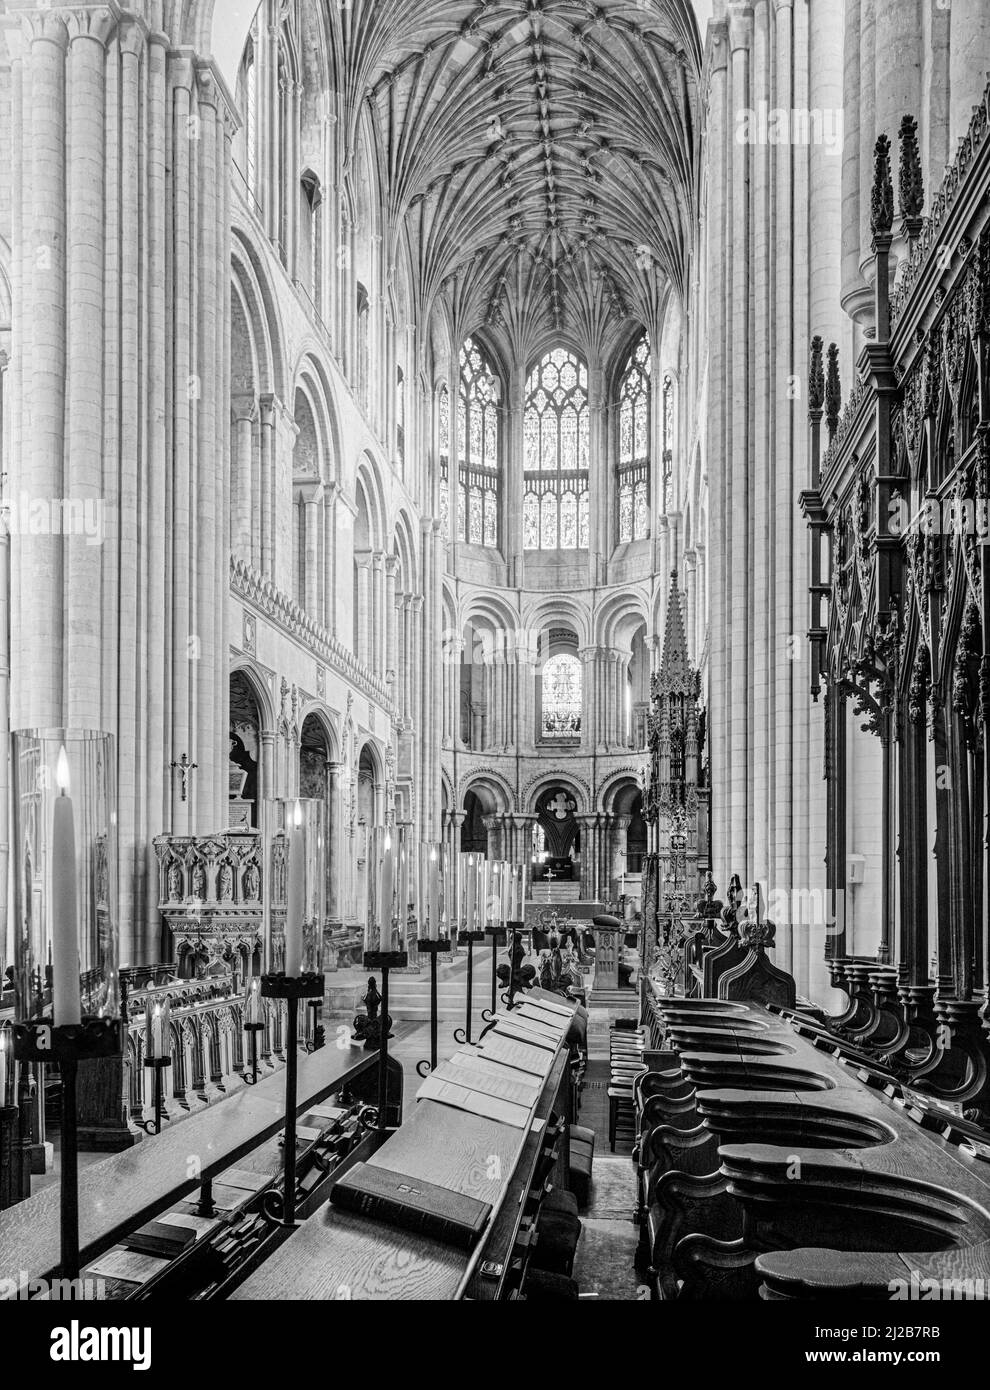 The prebytery of Norwich Cathedral viewed from the choir - photographed on a whole plate (8 1/2 inches x 6 1/2 inches) HP3 glass plate in 1973. Stock Photo